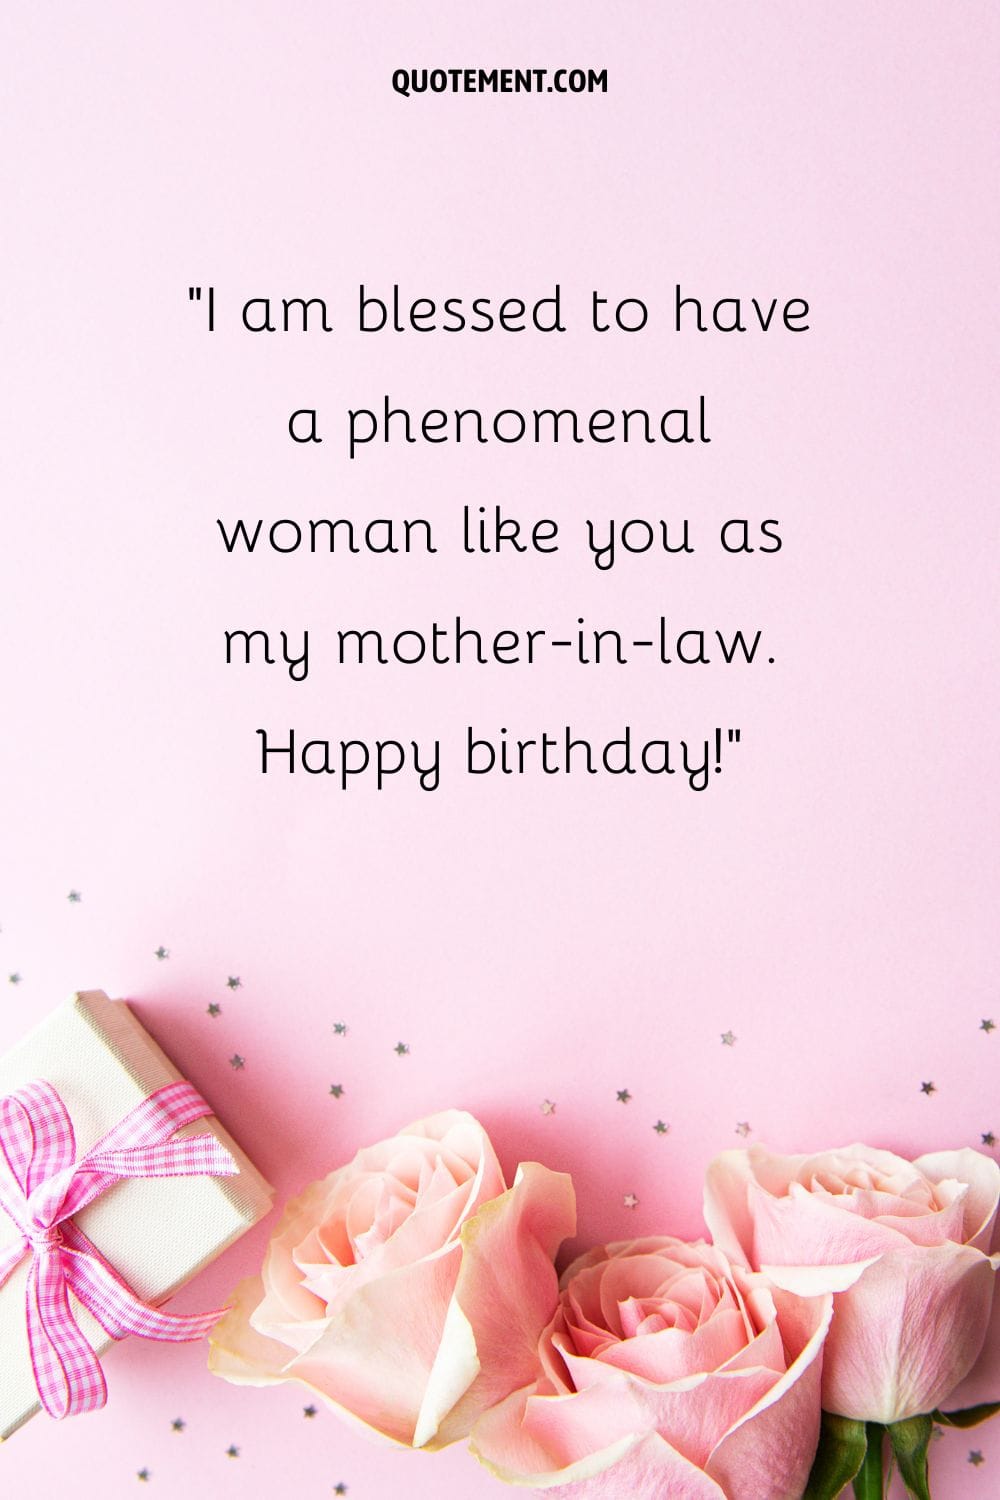 Birthday quote among a sea of lovely pink elements.